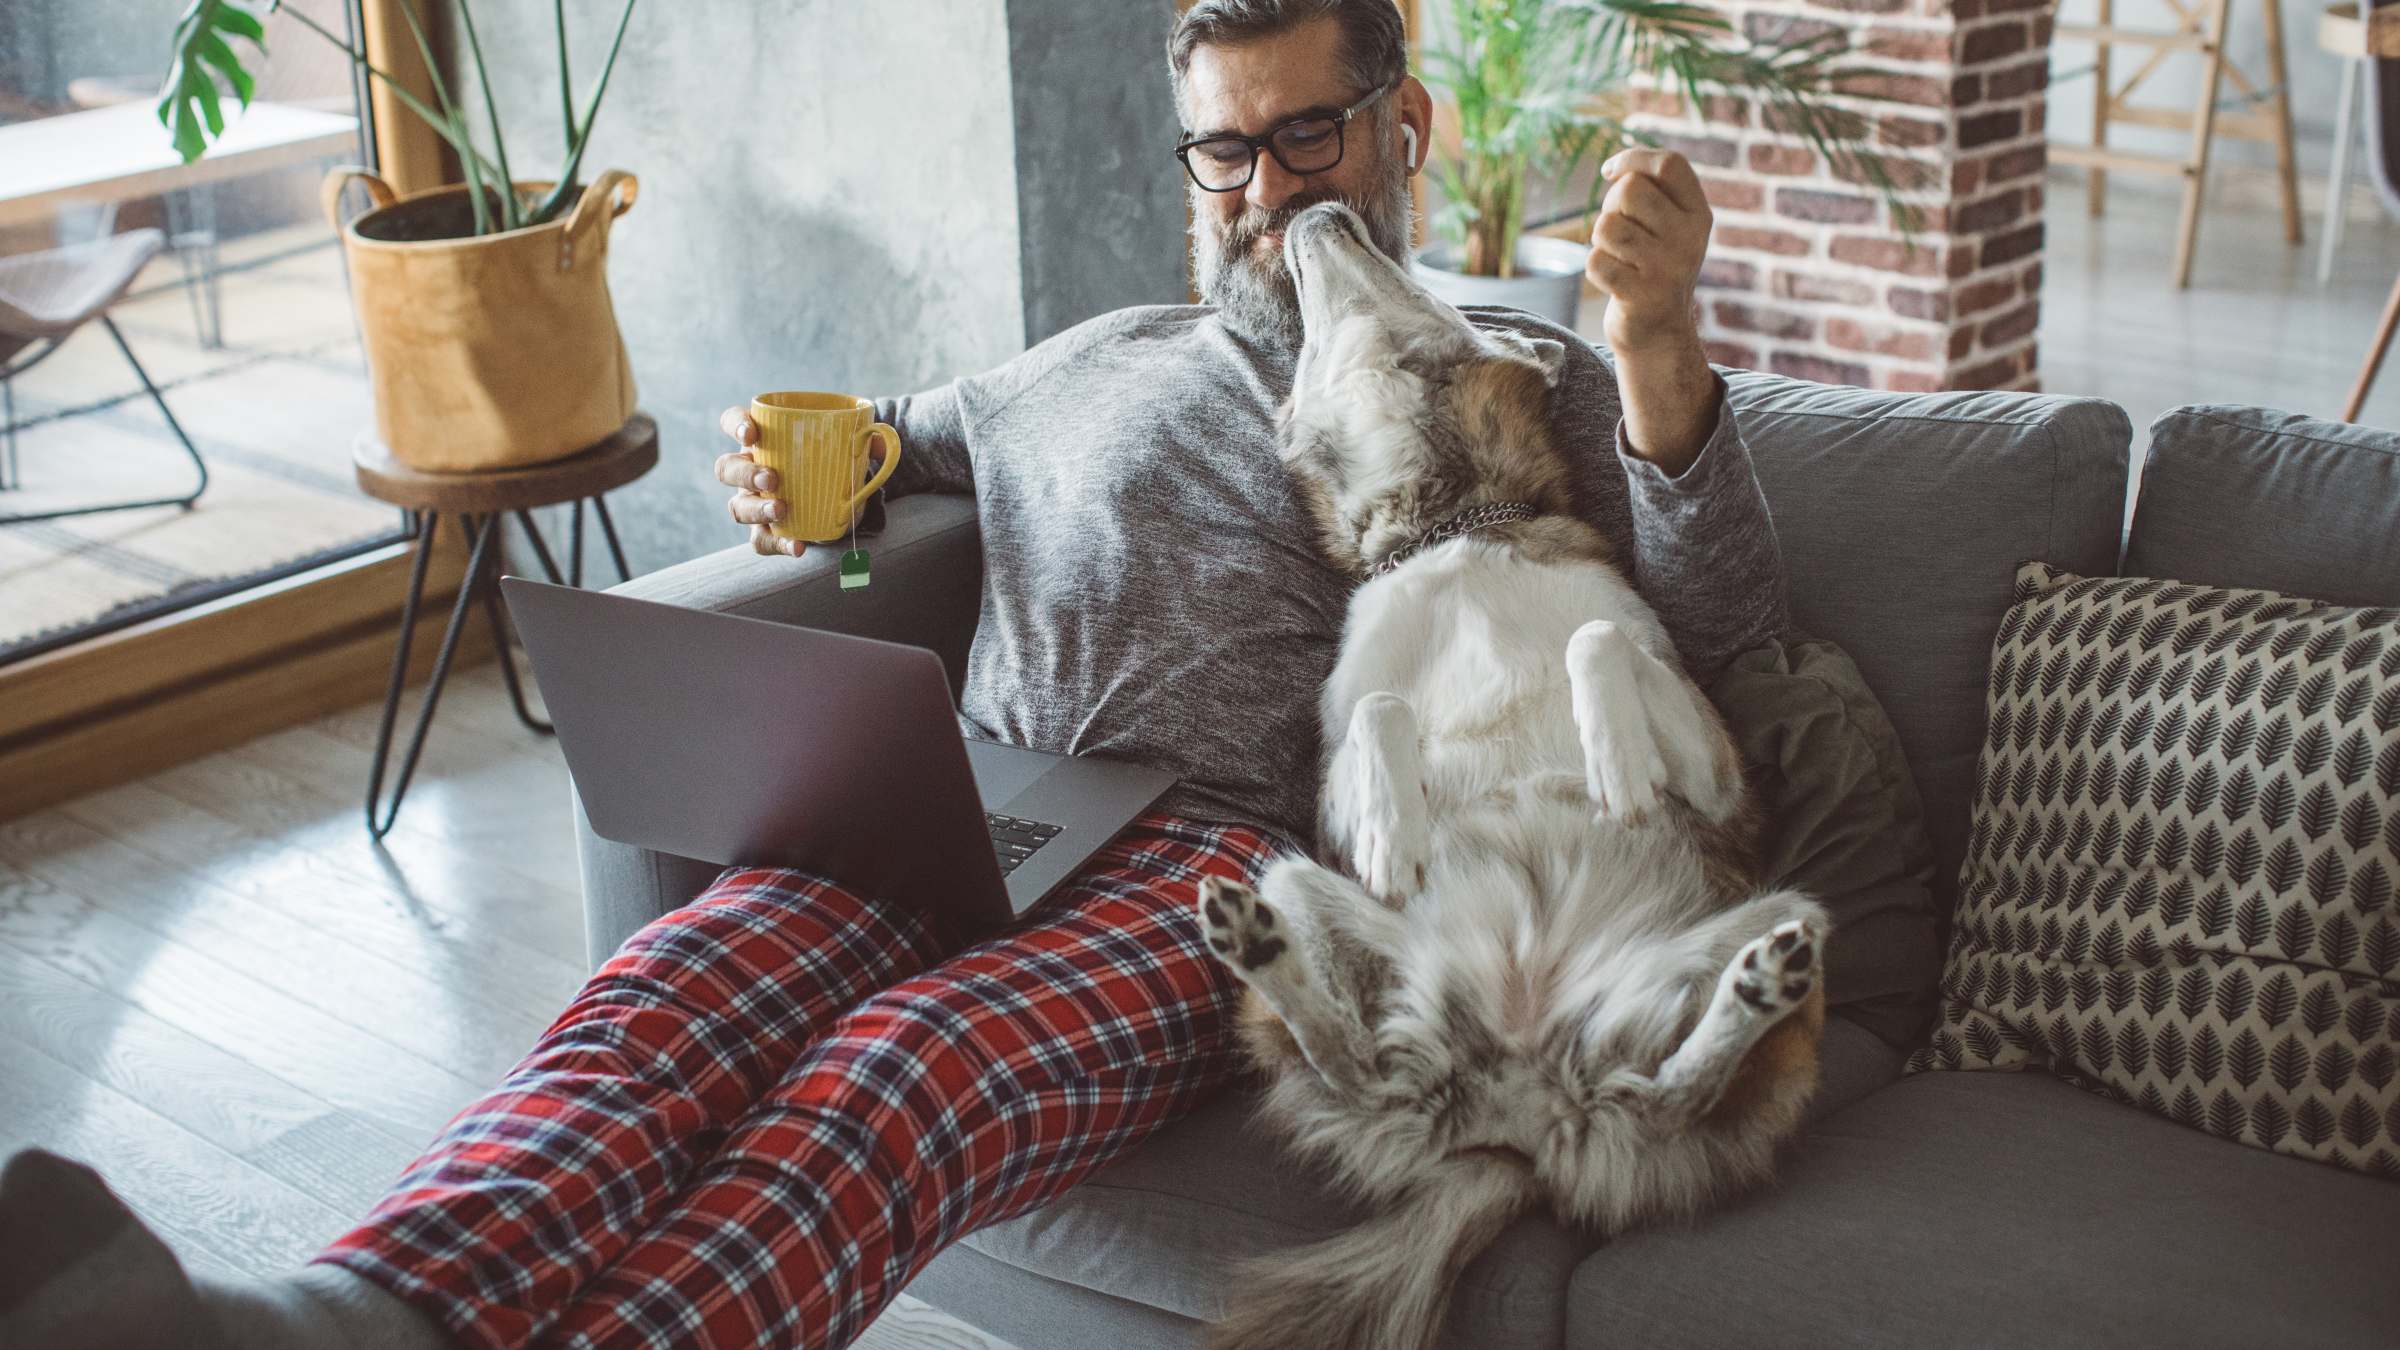 Man sitting on a couch with a laptop and a dog